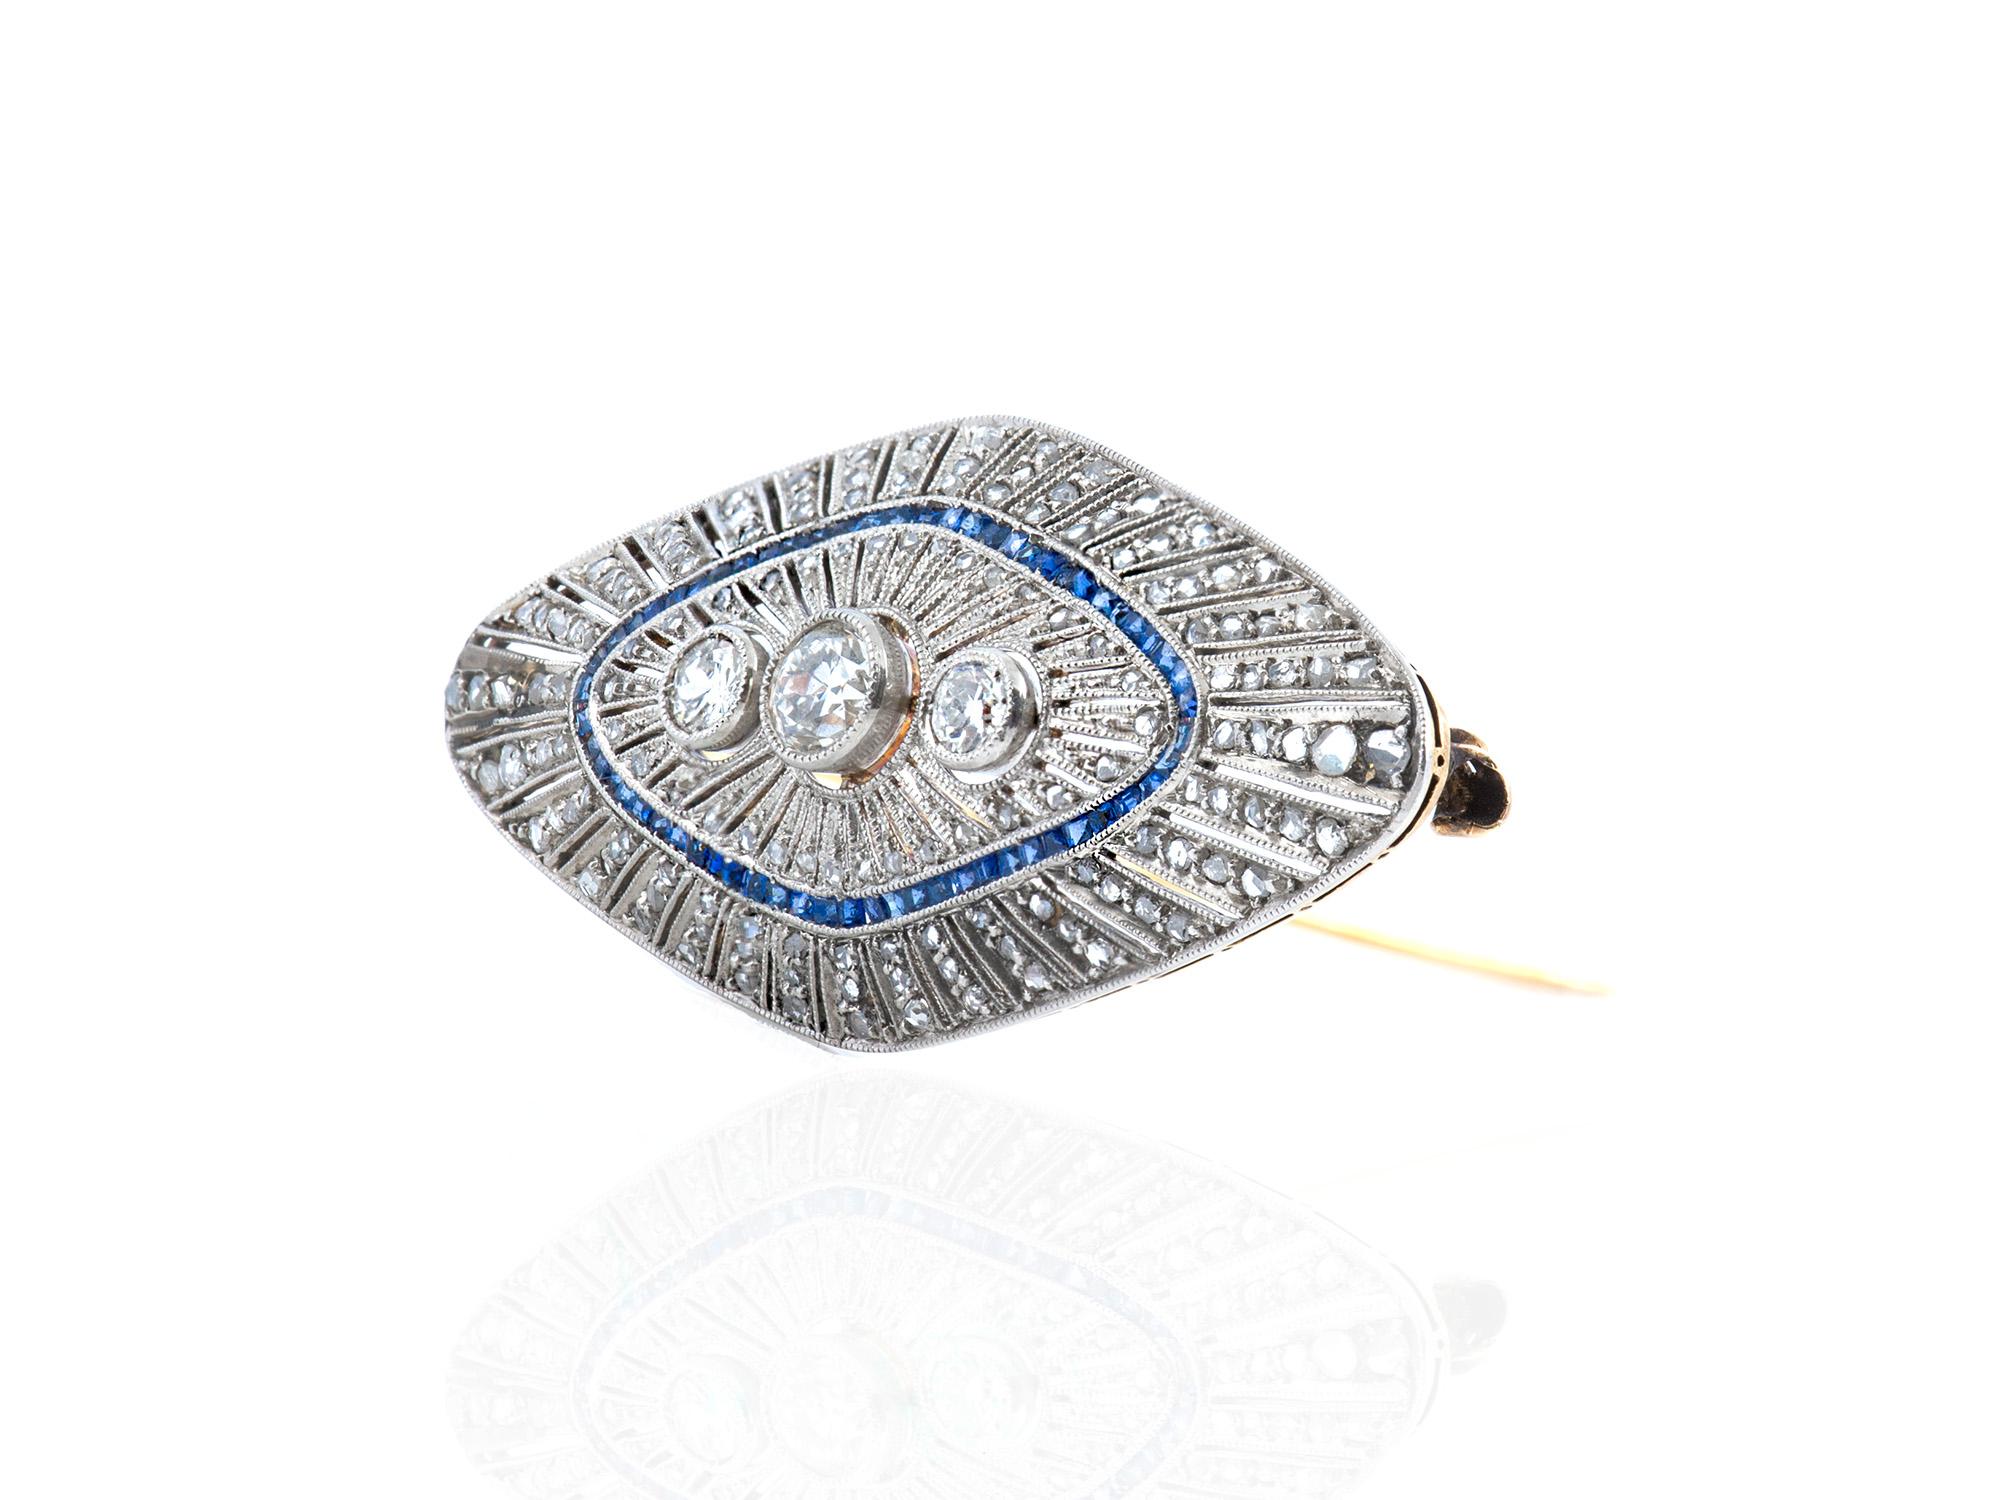 The brooch is finely crafted in platinum and 18k gold with diamonds weighing approximately total of 3.00 carat and sapphire weighing approximately total of 1.50 carat.